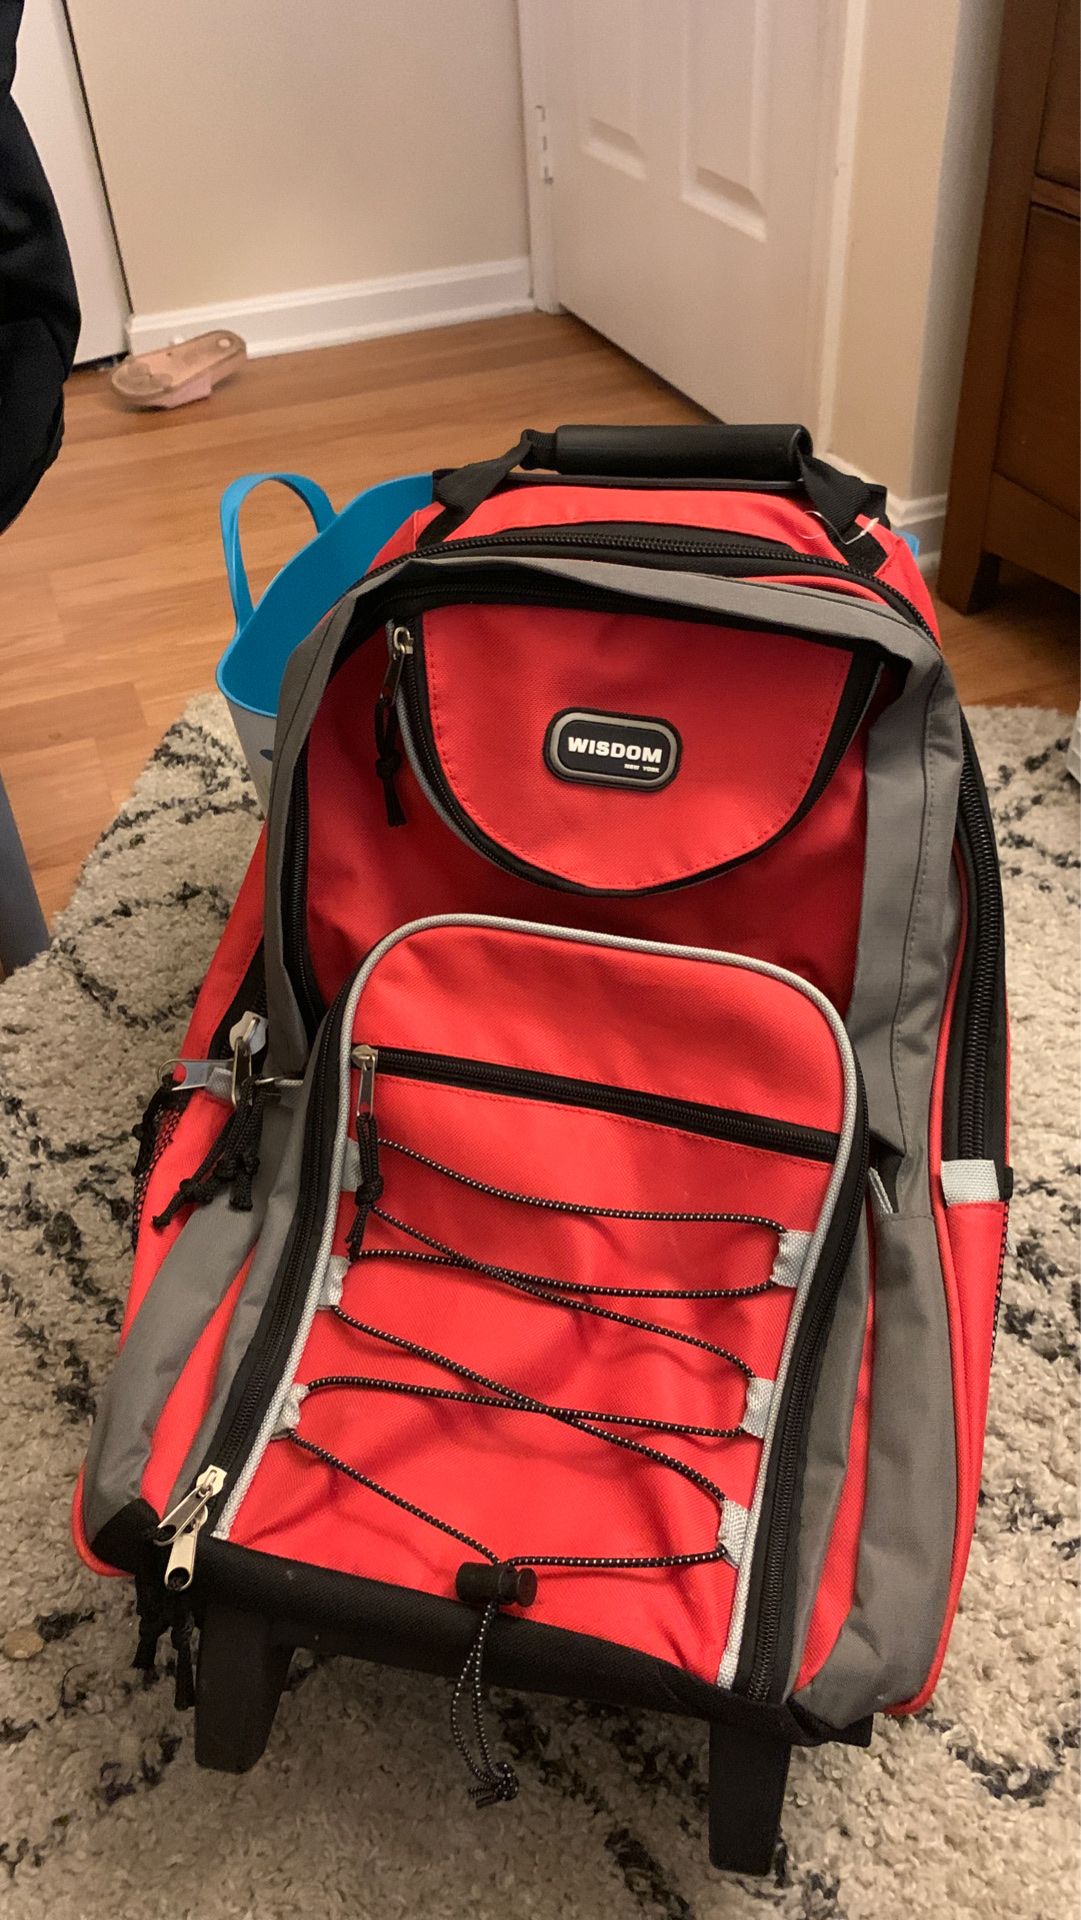 Wisdom backpack with wheels